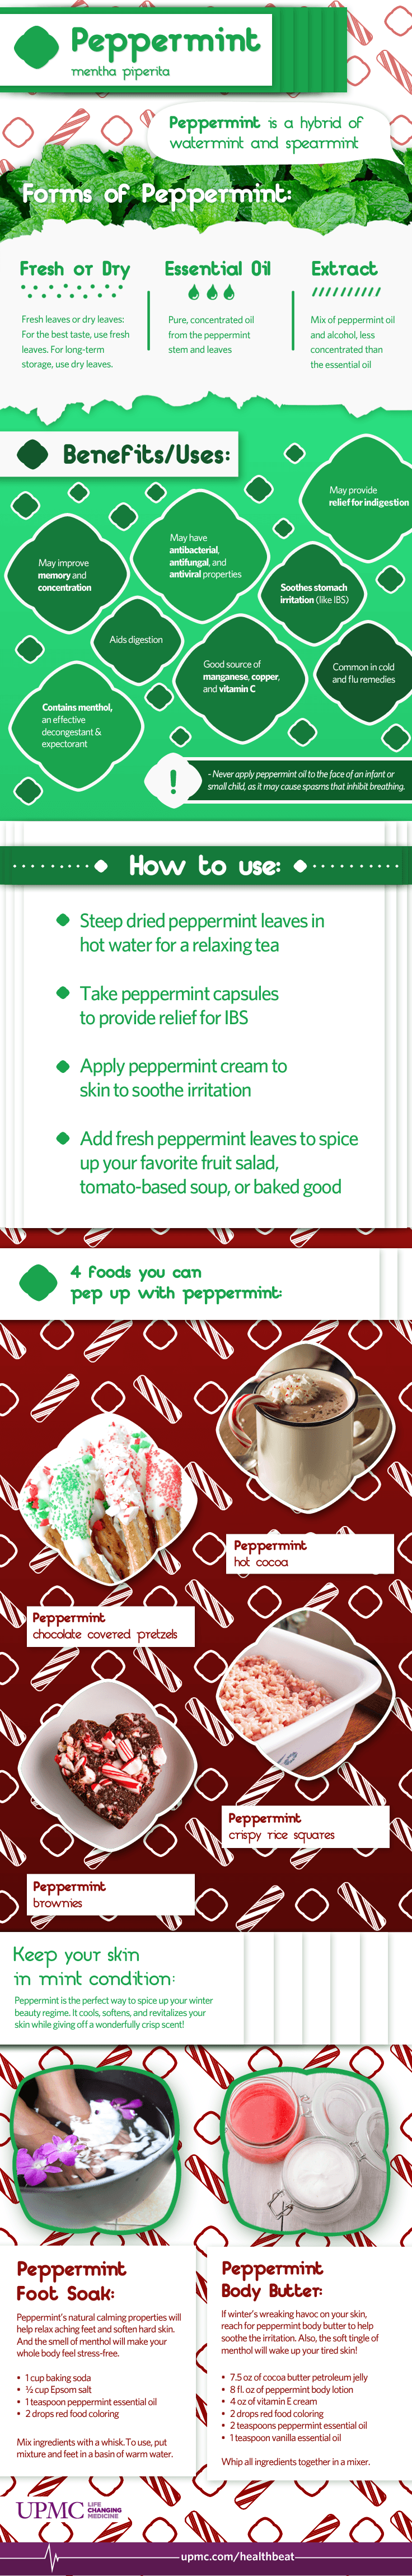 Discover the many health benefits of peppermint.